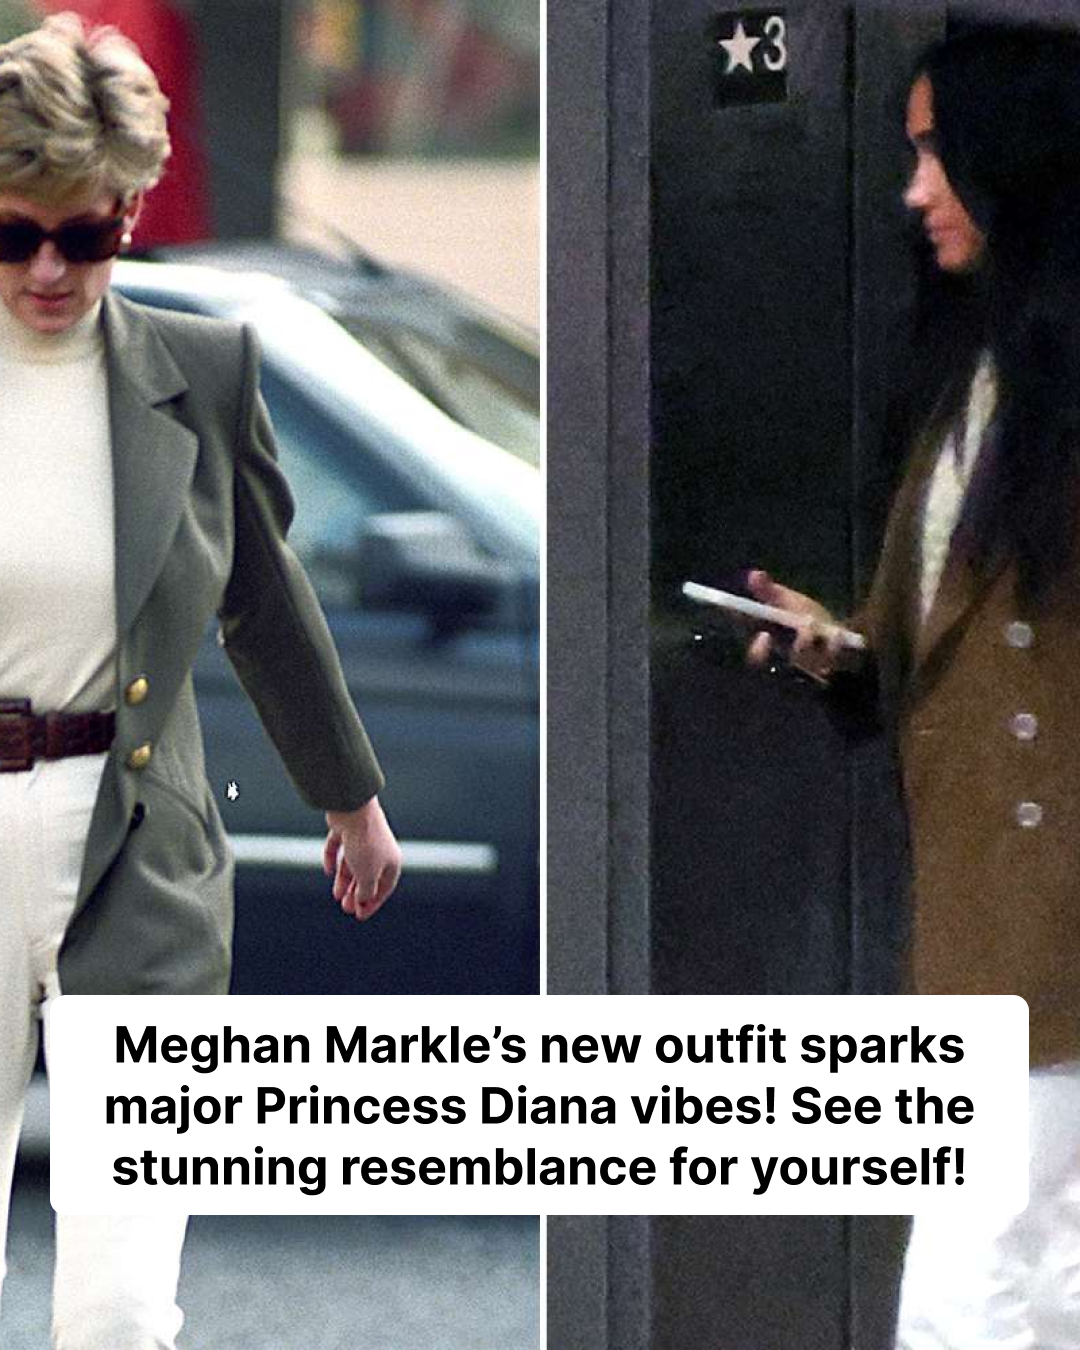 Meghan Markle Perfectly Recreates Princess Diana’s Iconic Blazer Outfit as She Returns from Nigeria